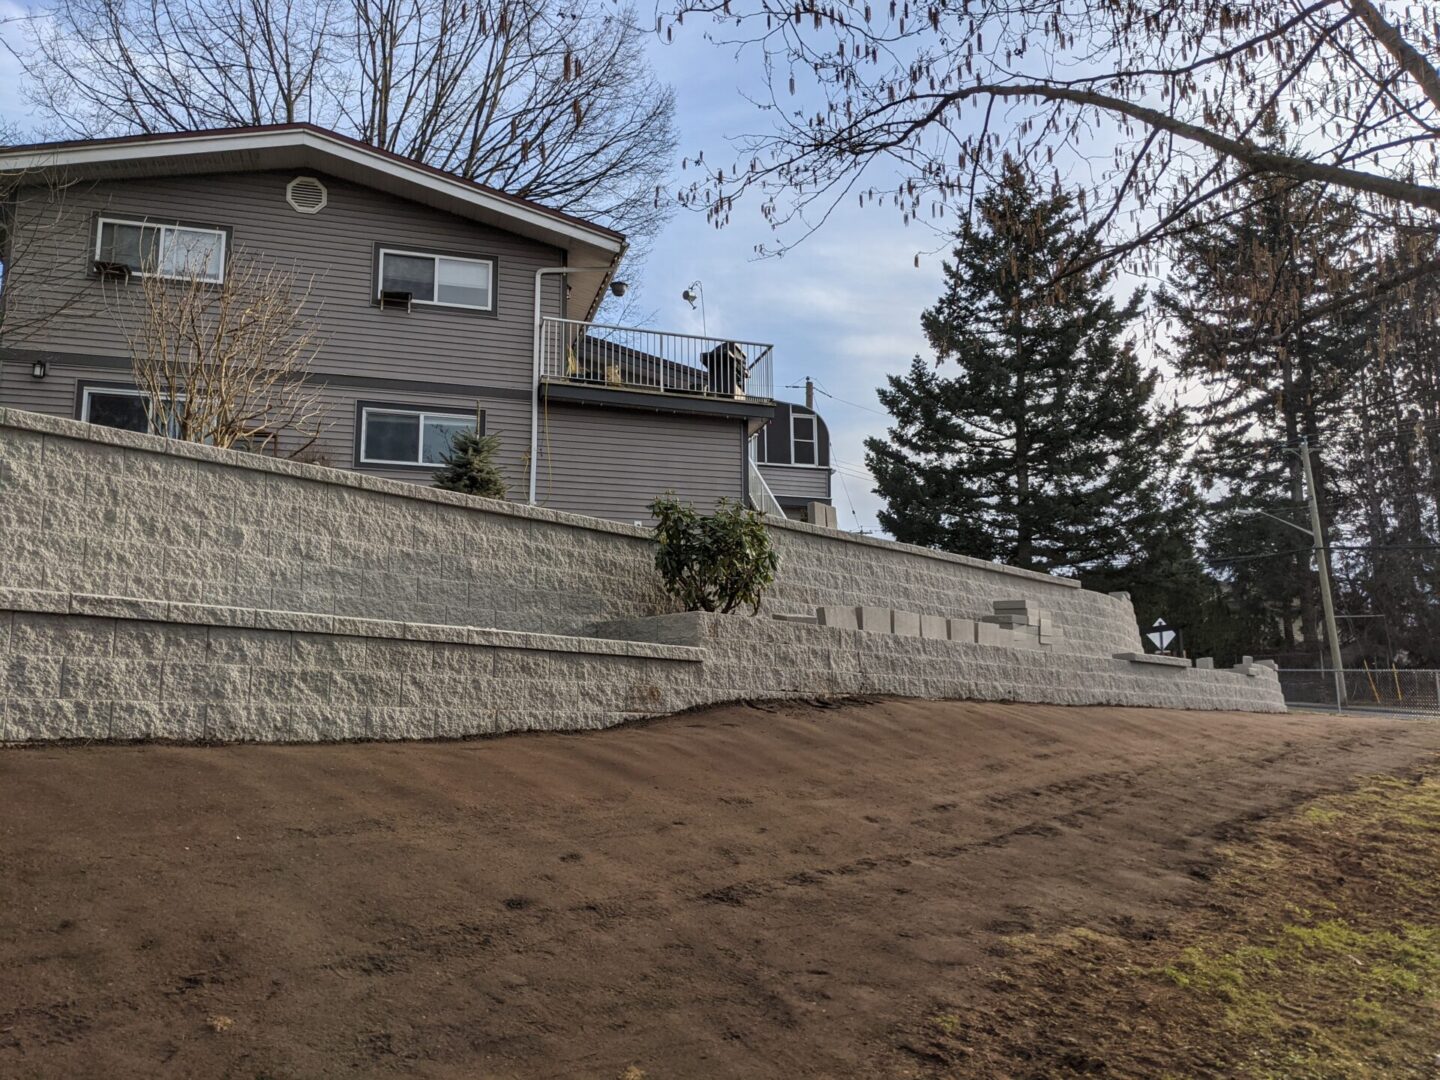 A suburban house with a tall stone retaining wall and a lawn, under a cloudy sky.